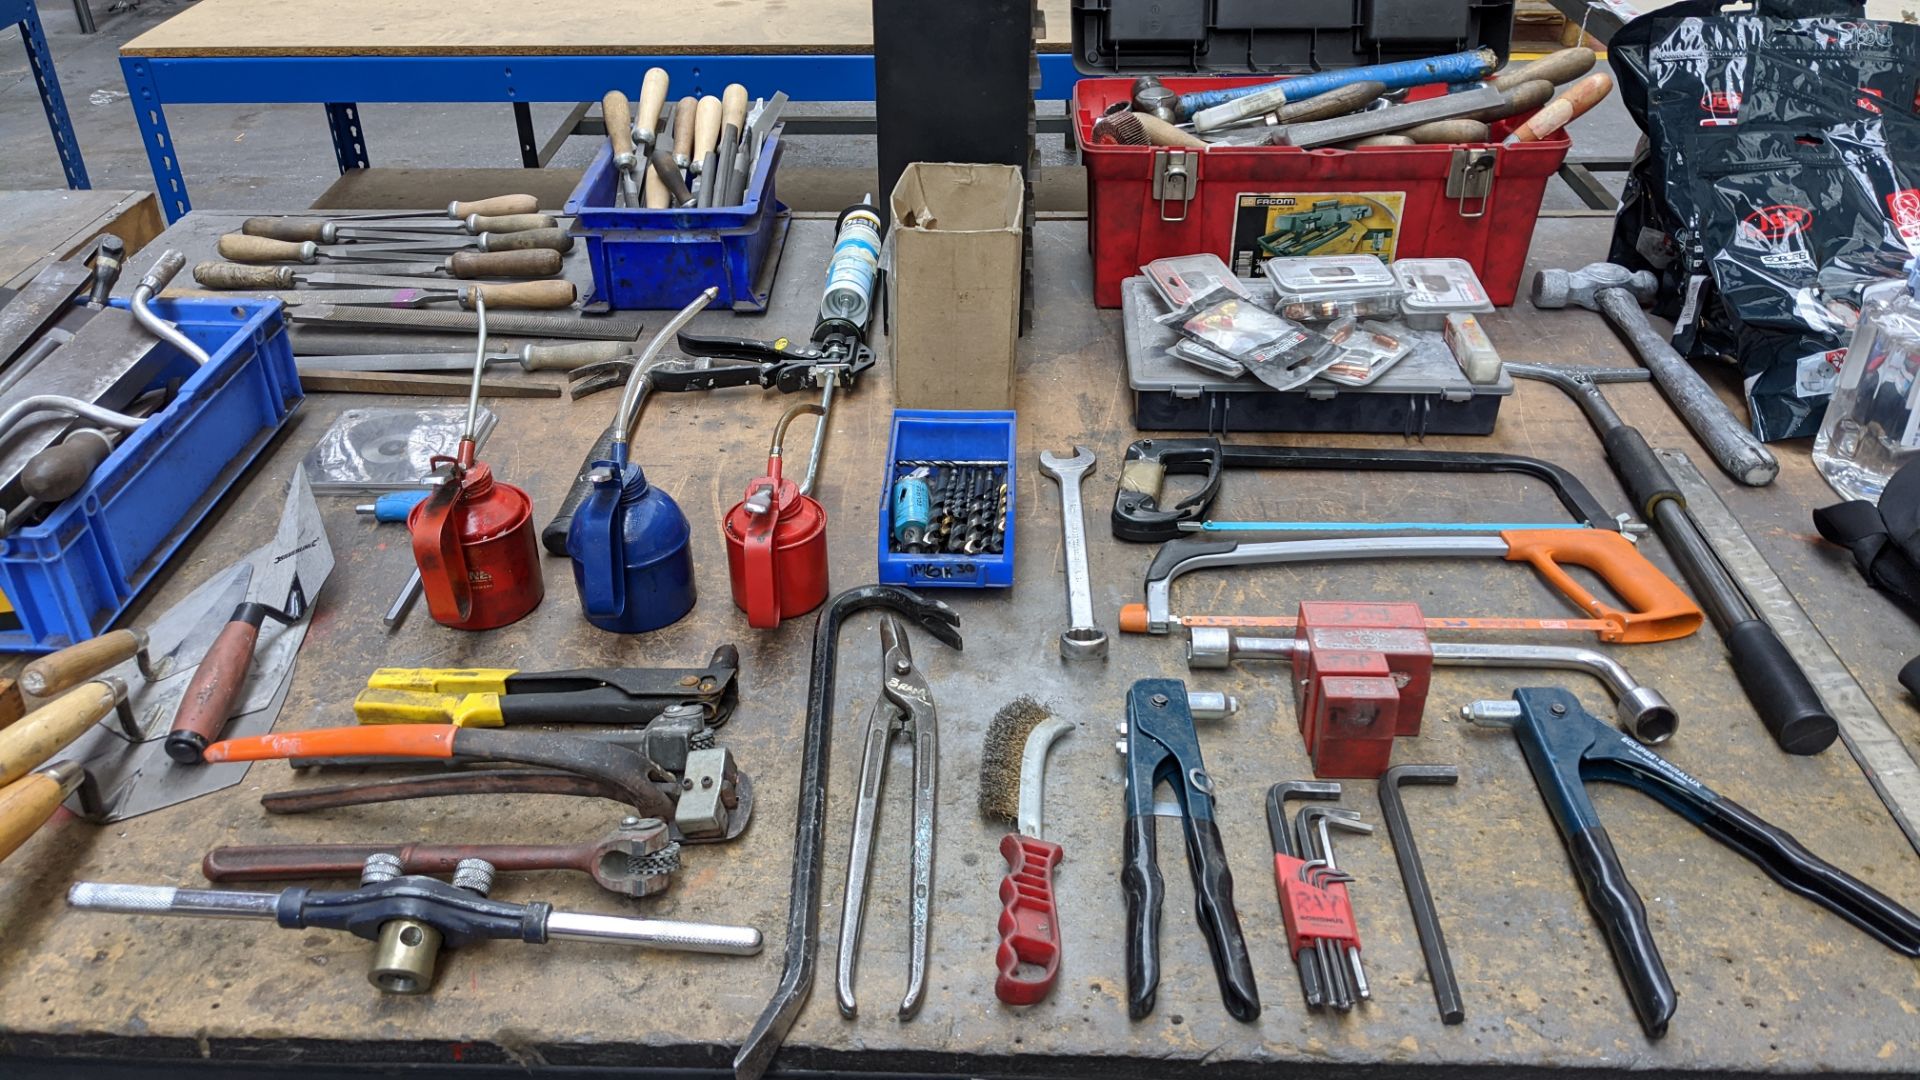 Bench & contents including vice, hand tools, riveting equipment, face masks & other PPE, chisels & - Image 5 of 12